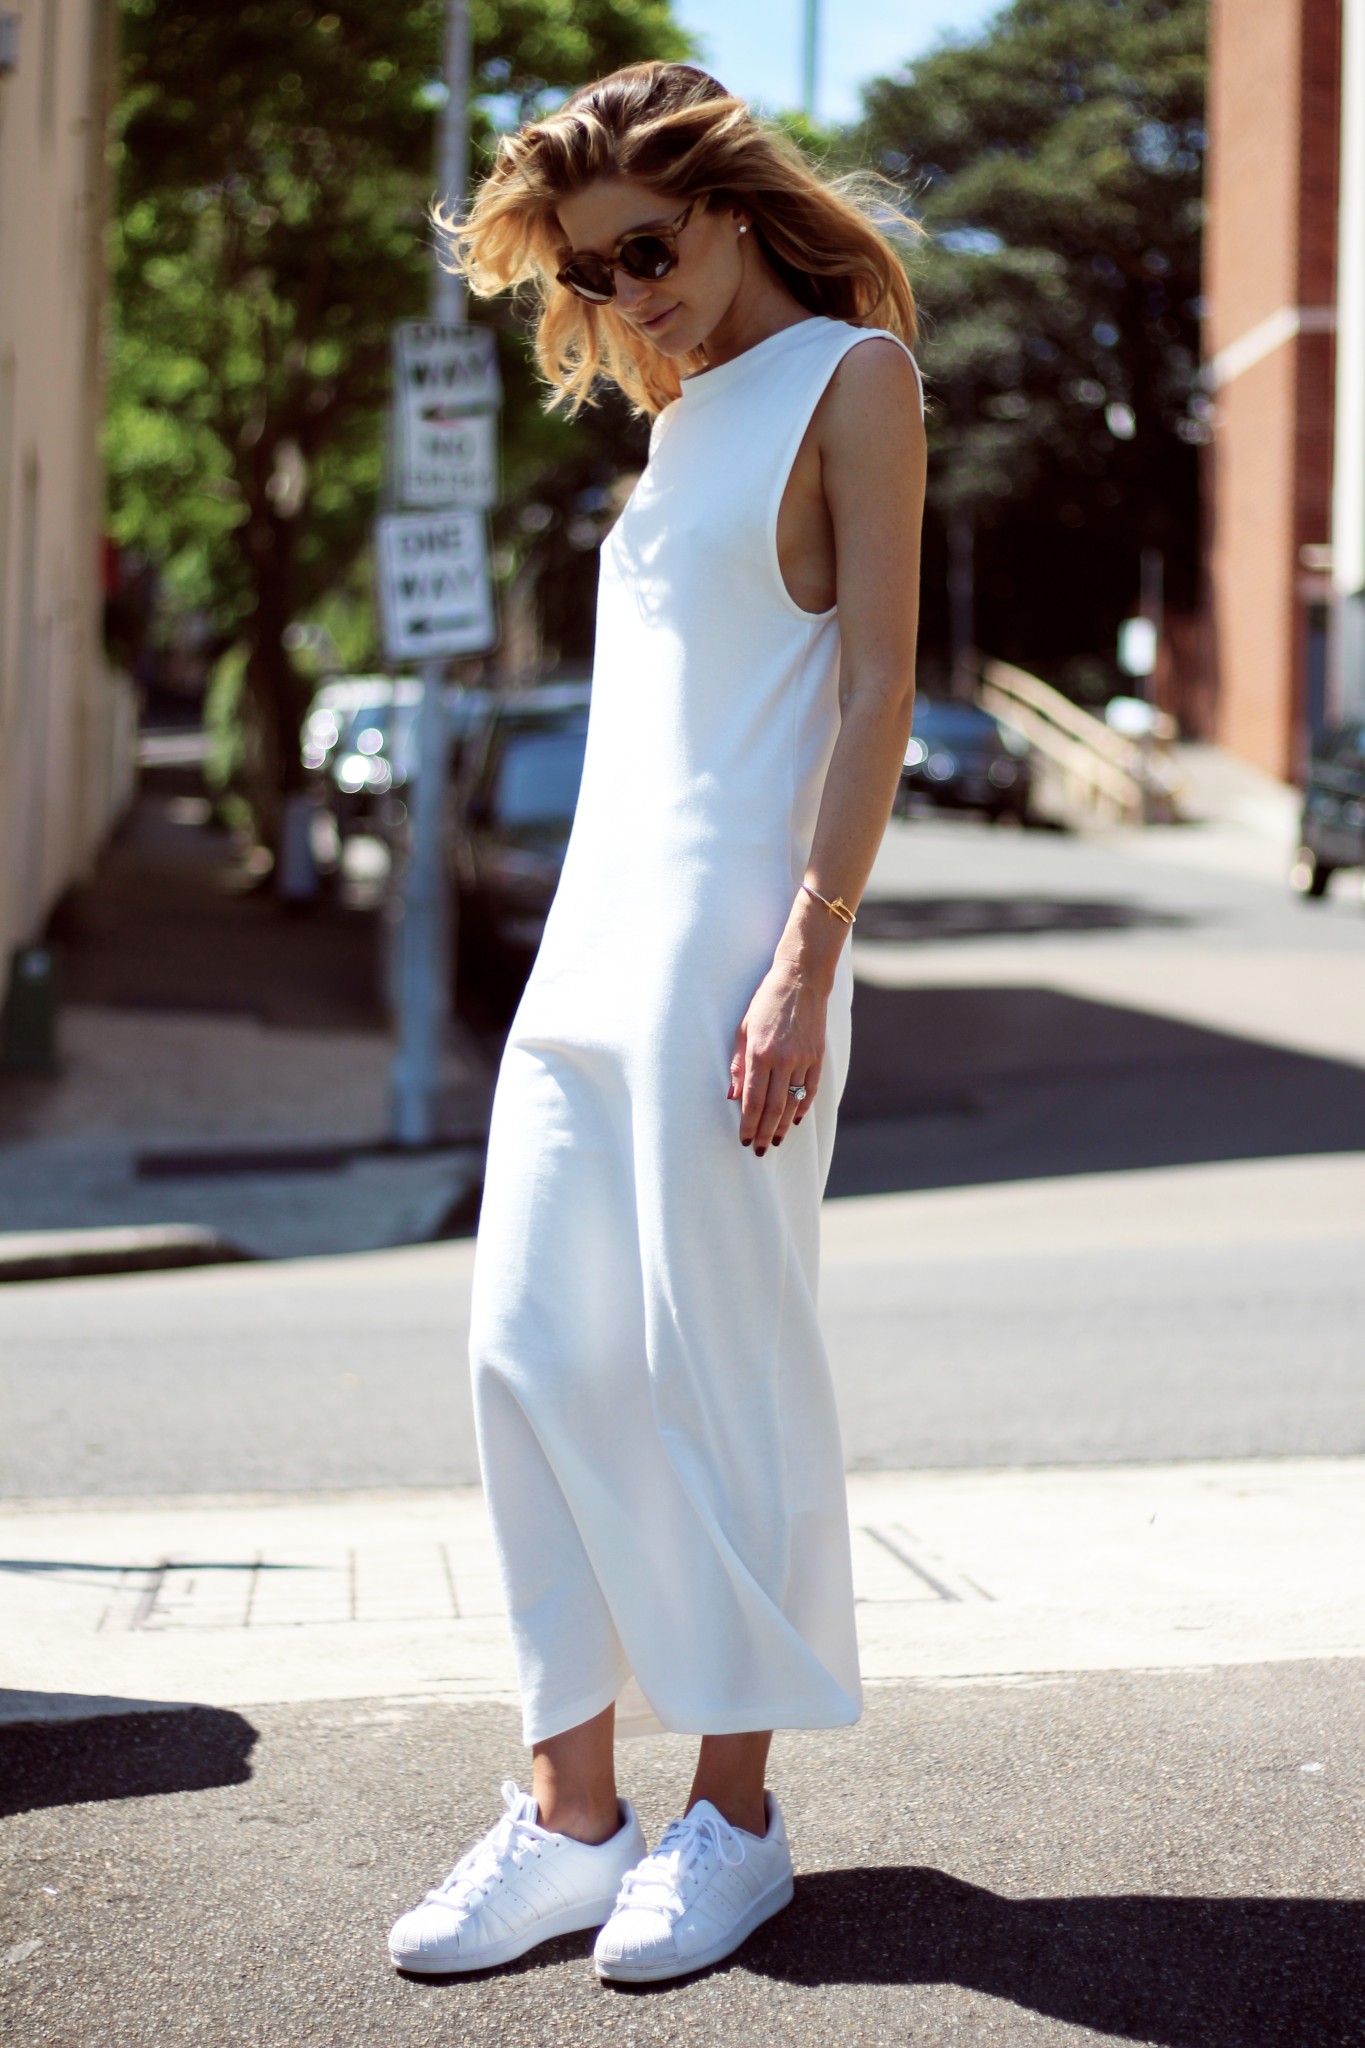 What I wore: By the Harbour - Kate Waterhouse